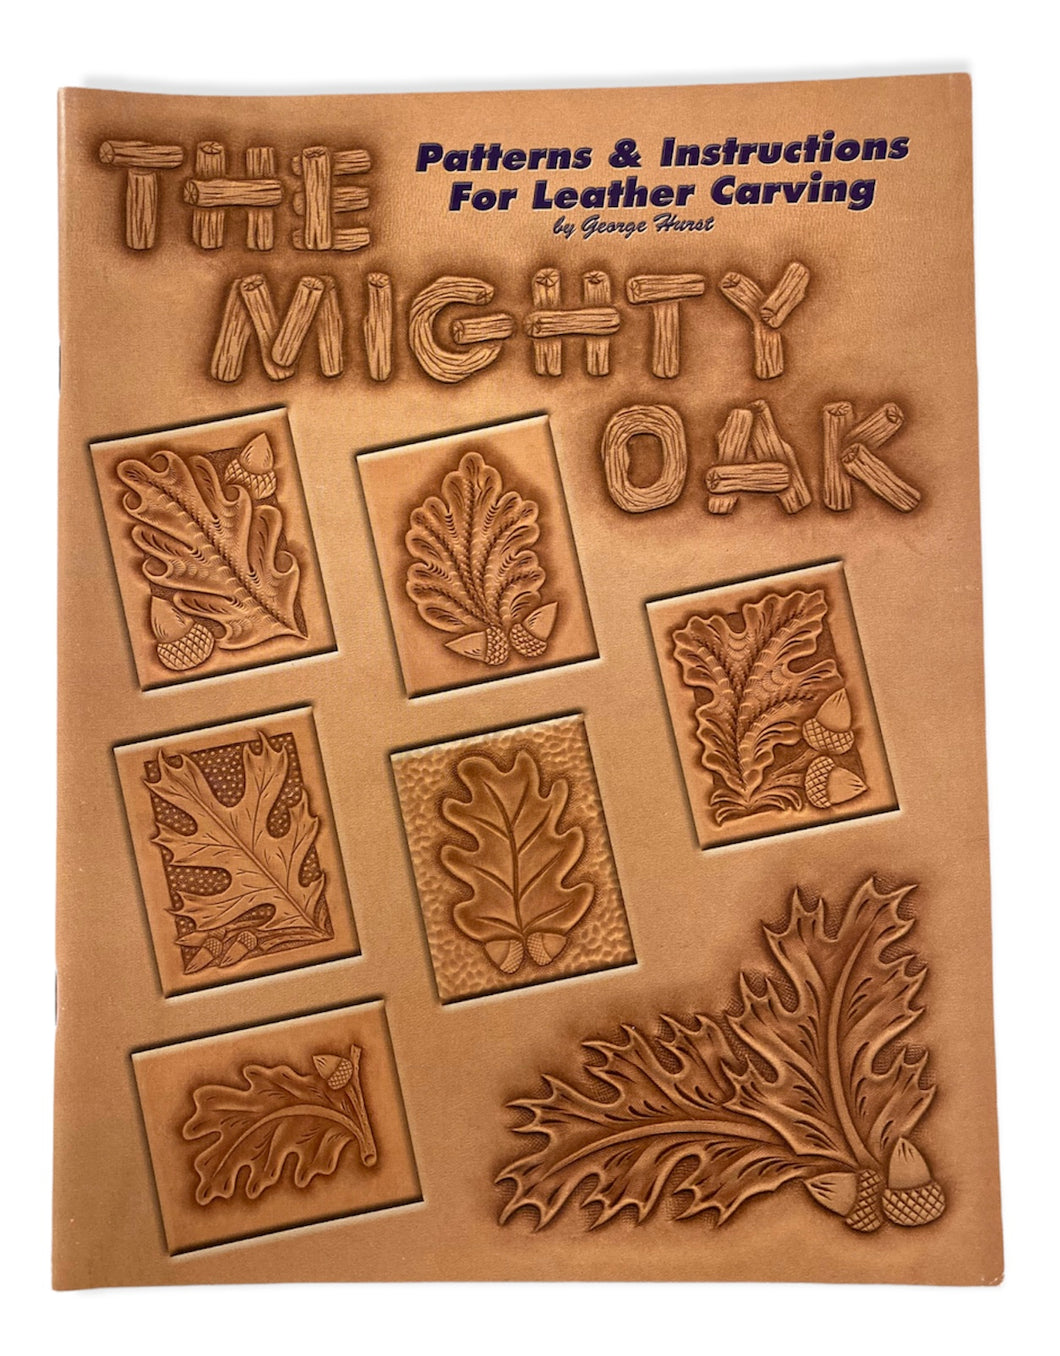 The Mighty Oak book